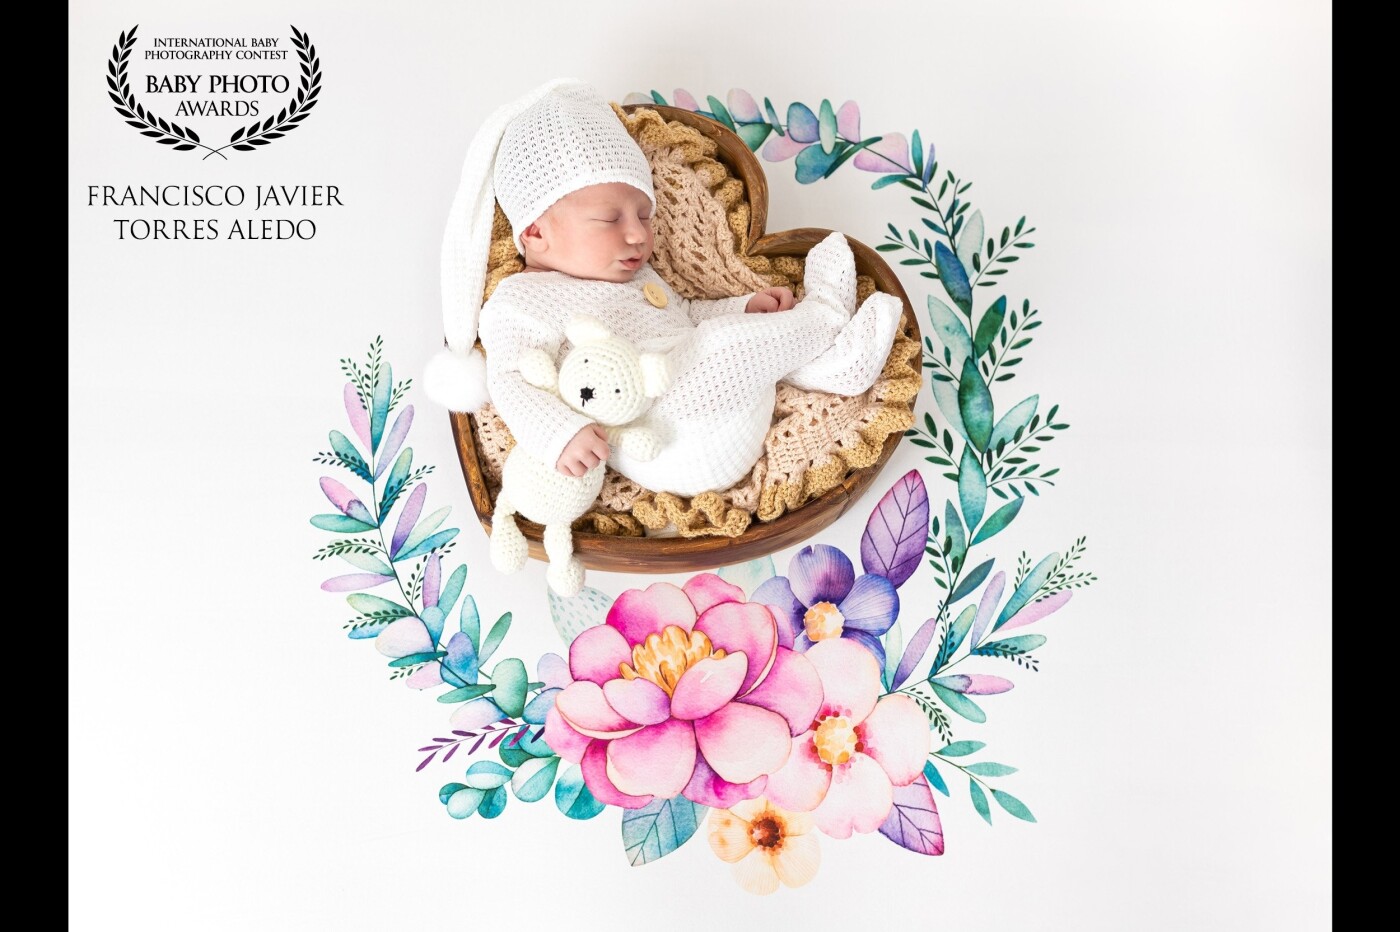 This photo session was very special. Aníbal behaved especially well and left us some very nice and emotional photos, alone and with his parents. It is always a pleasure to capture these special moments of newborns.